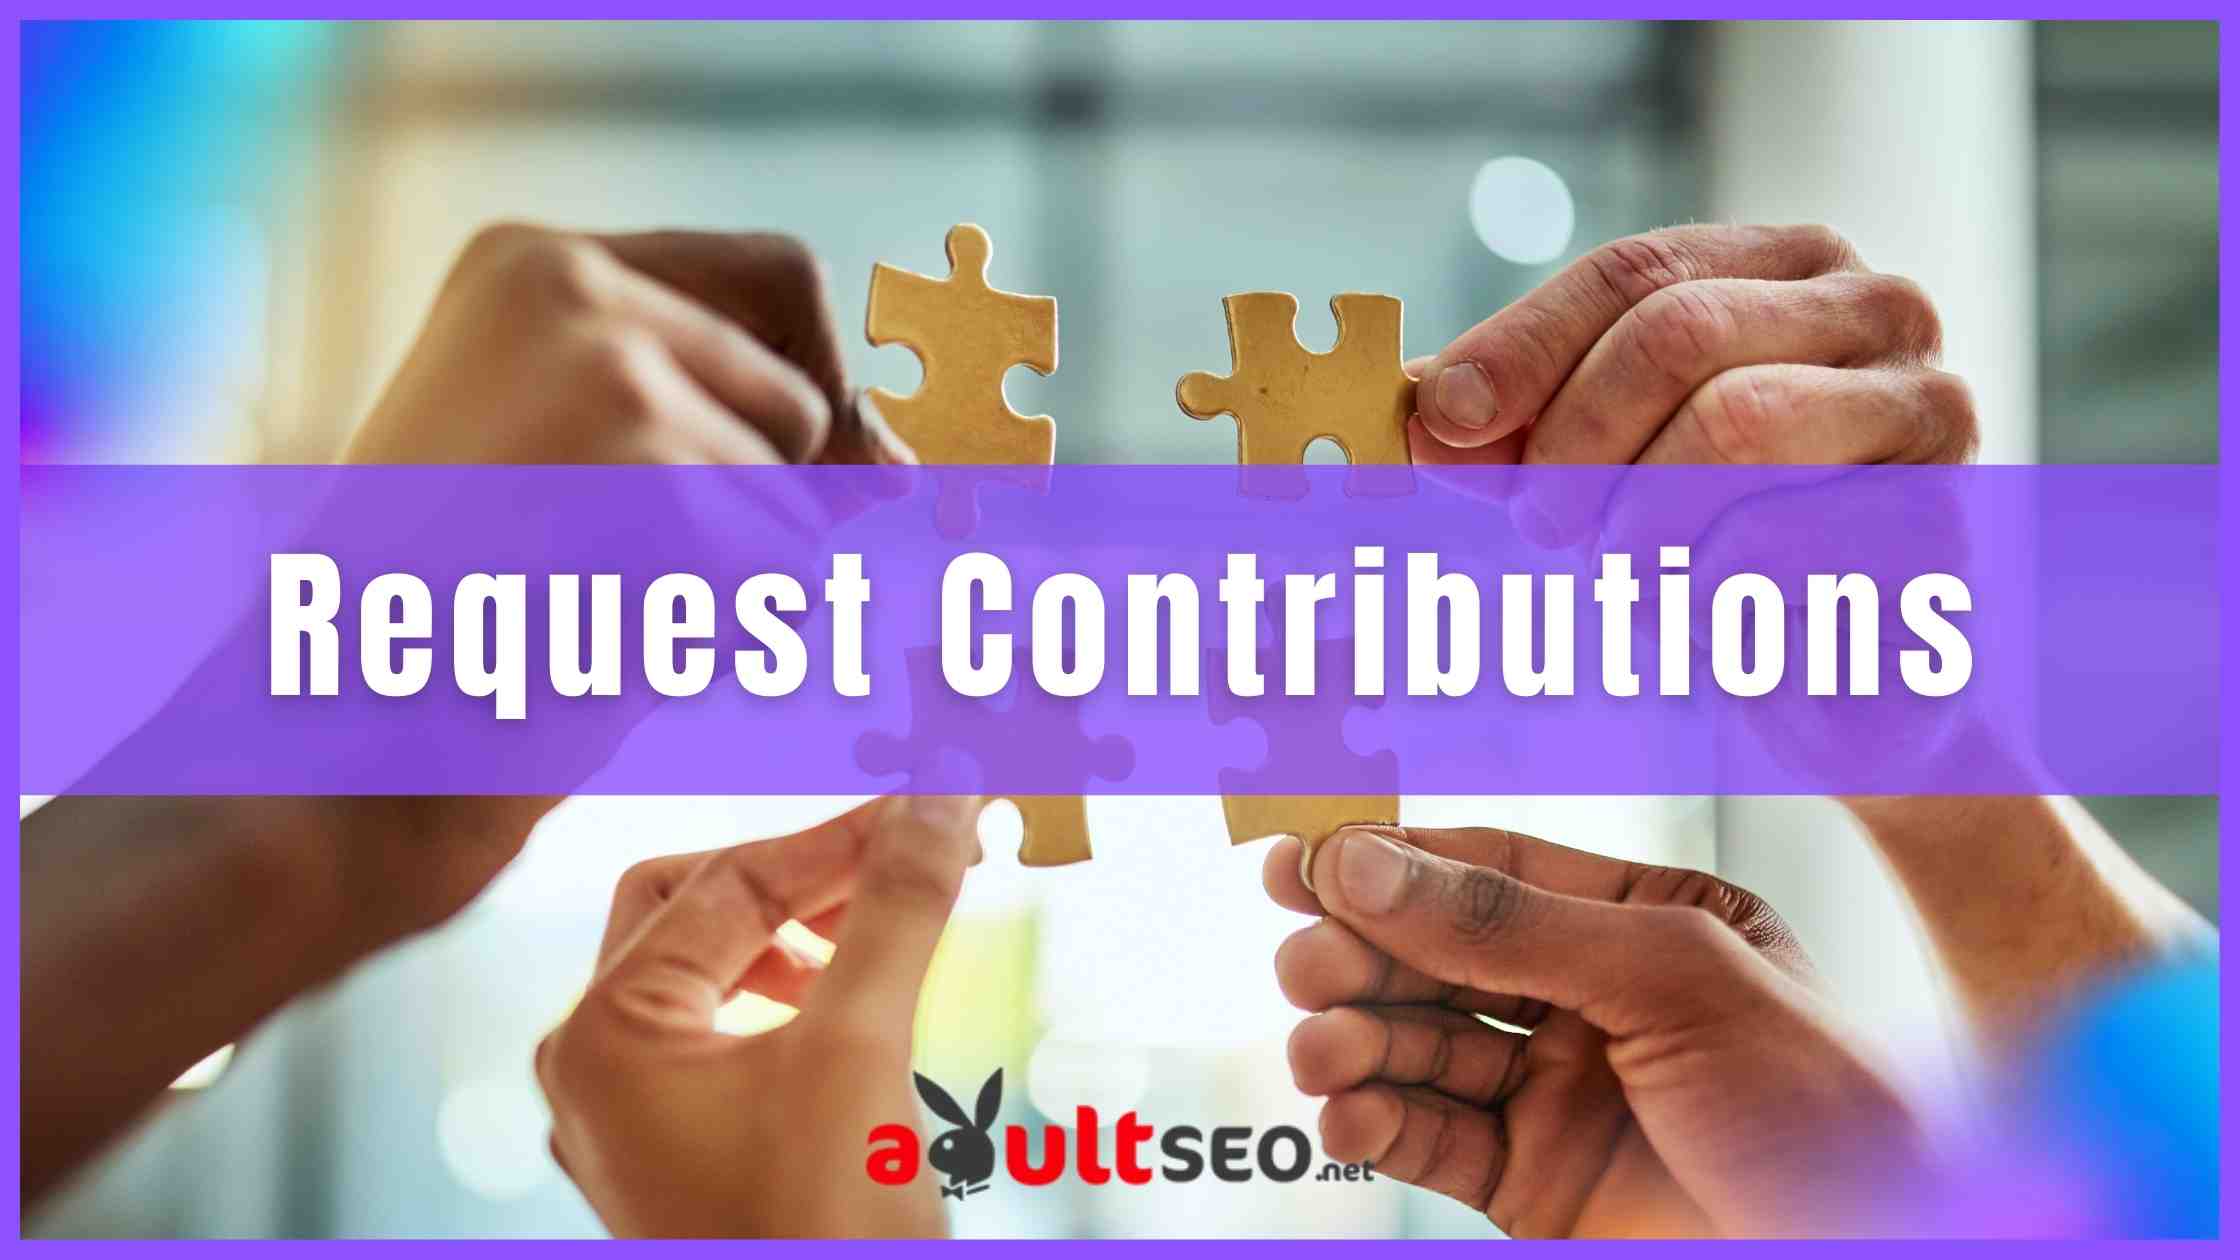 Request contributions